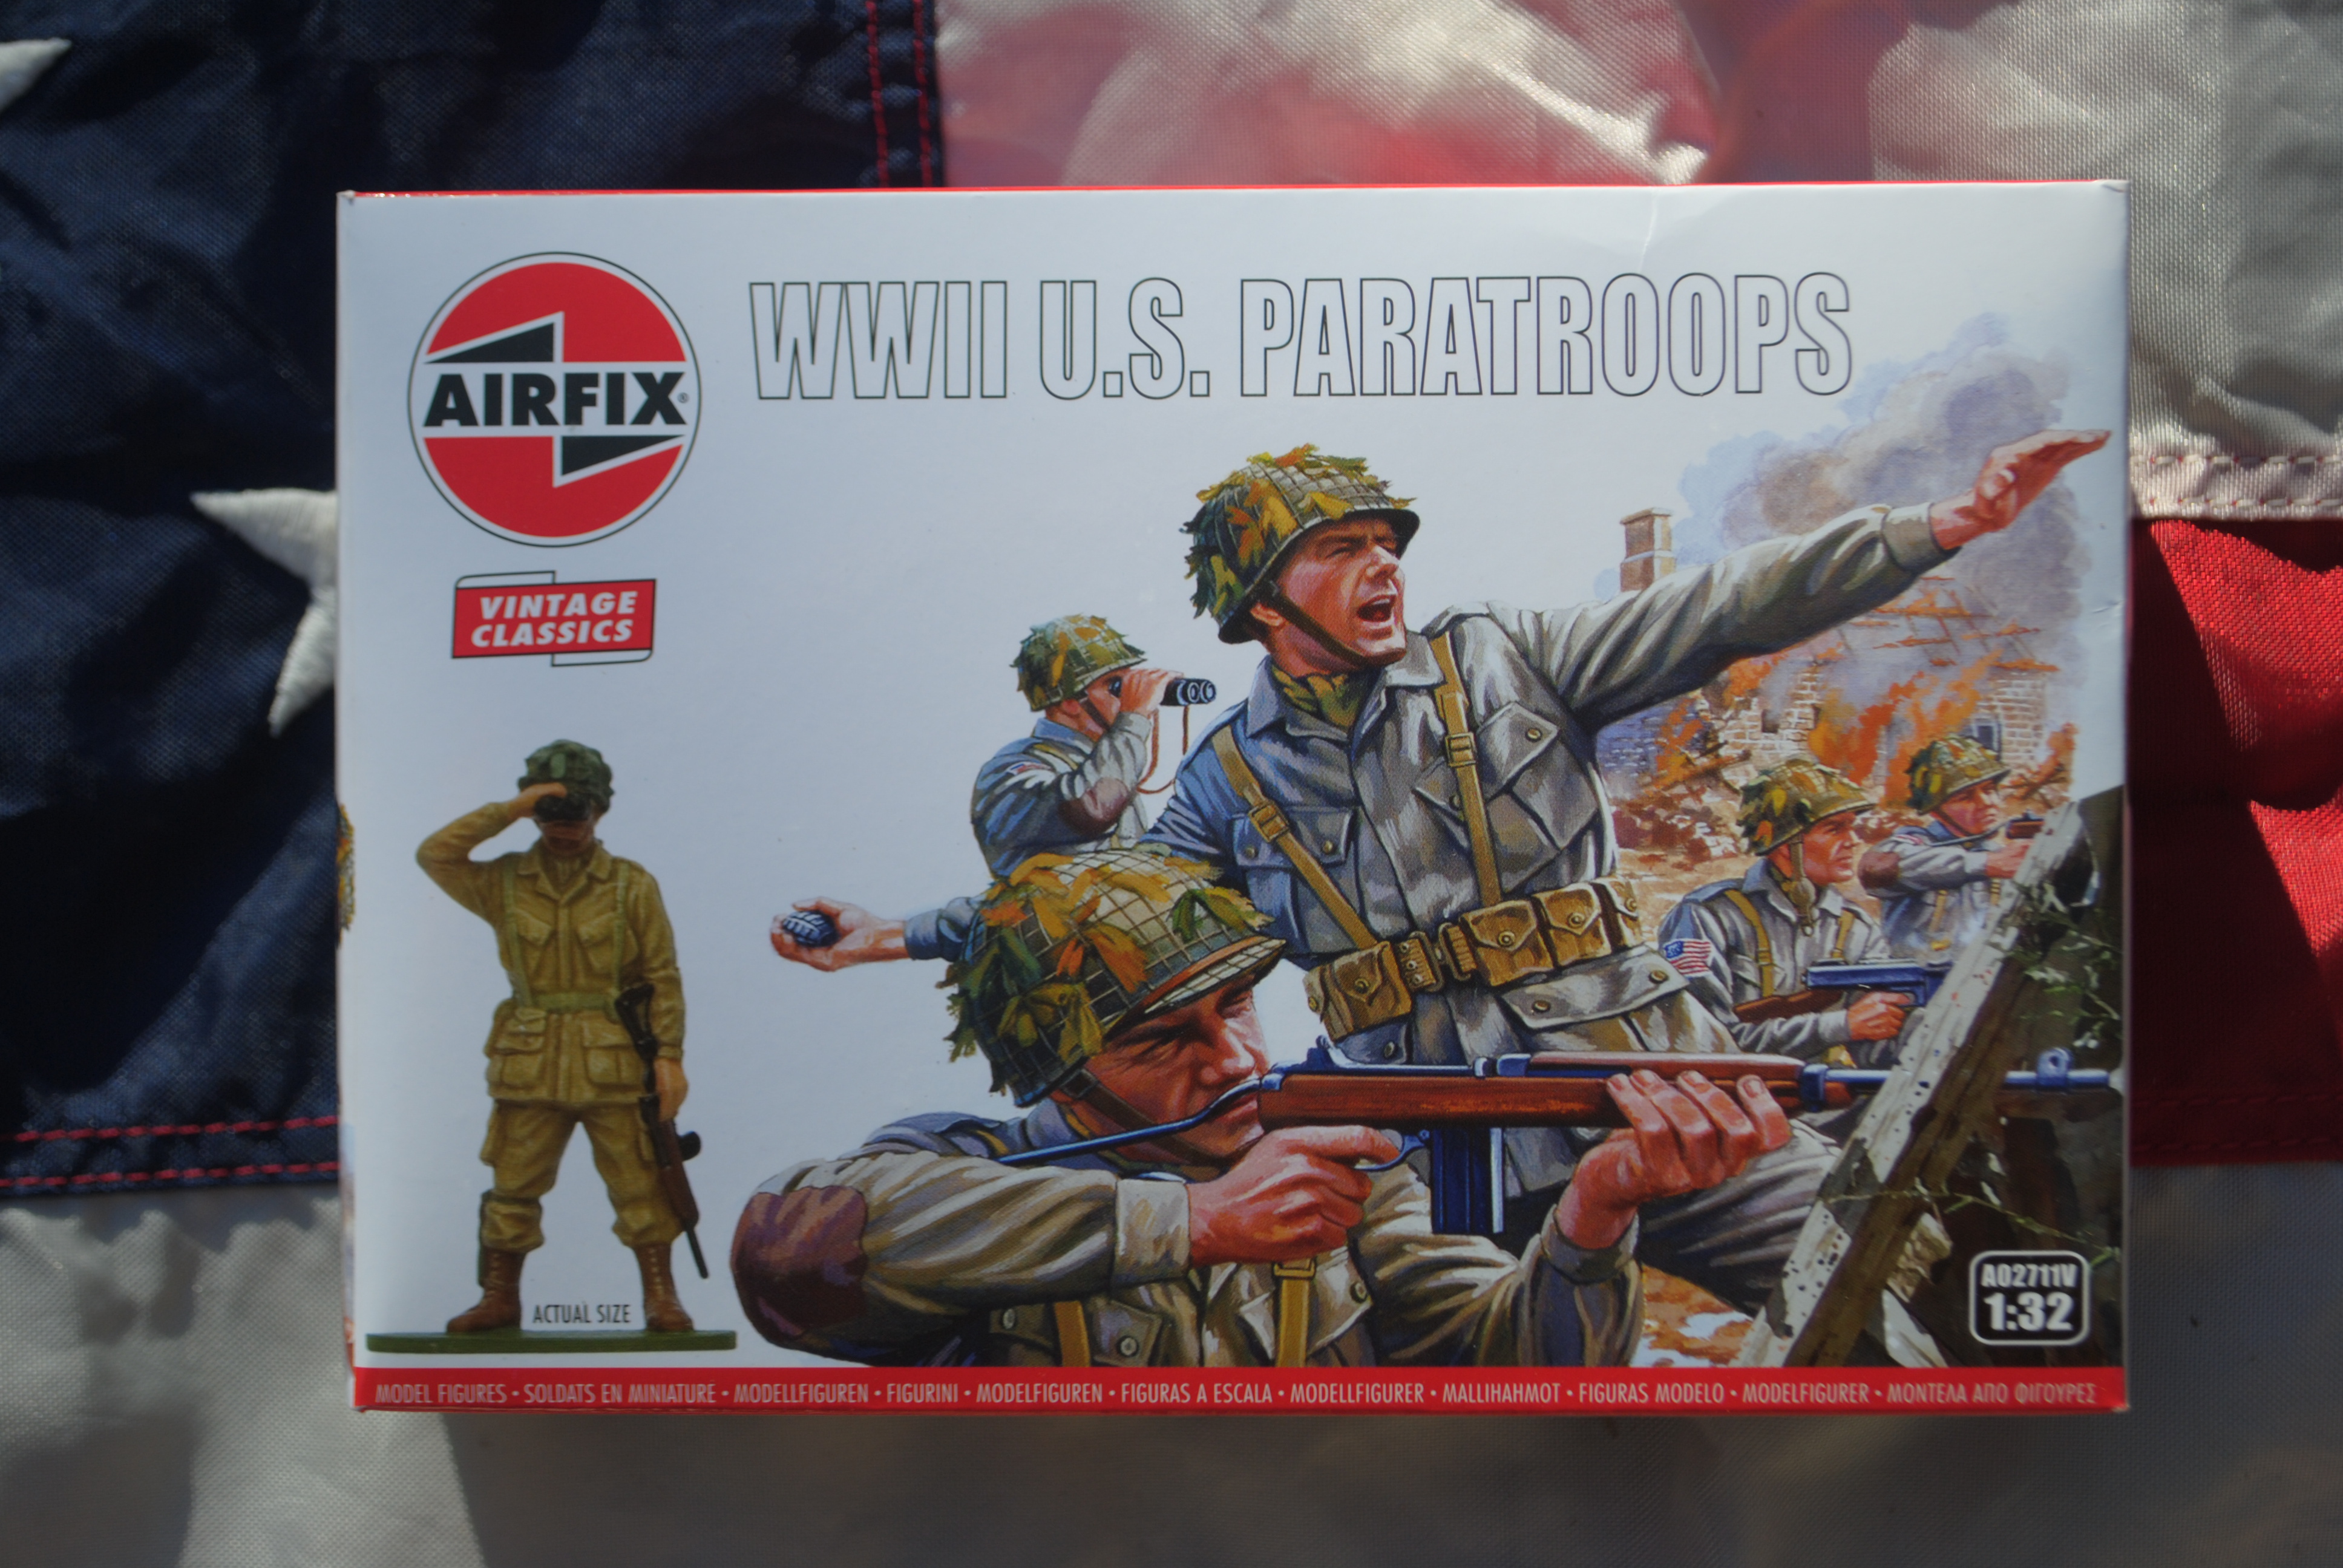 Airfix A02711V WWII U.S.PARATROOPERS